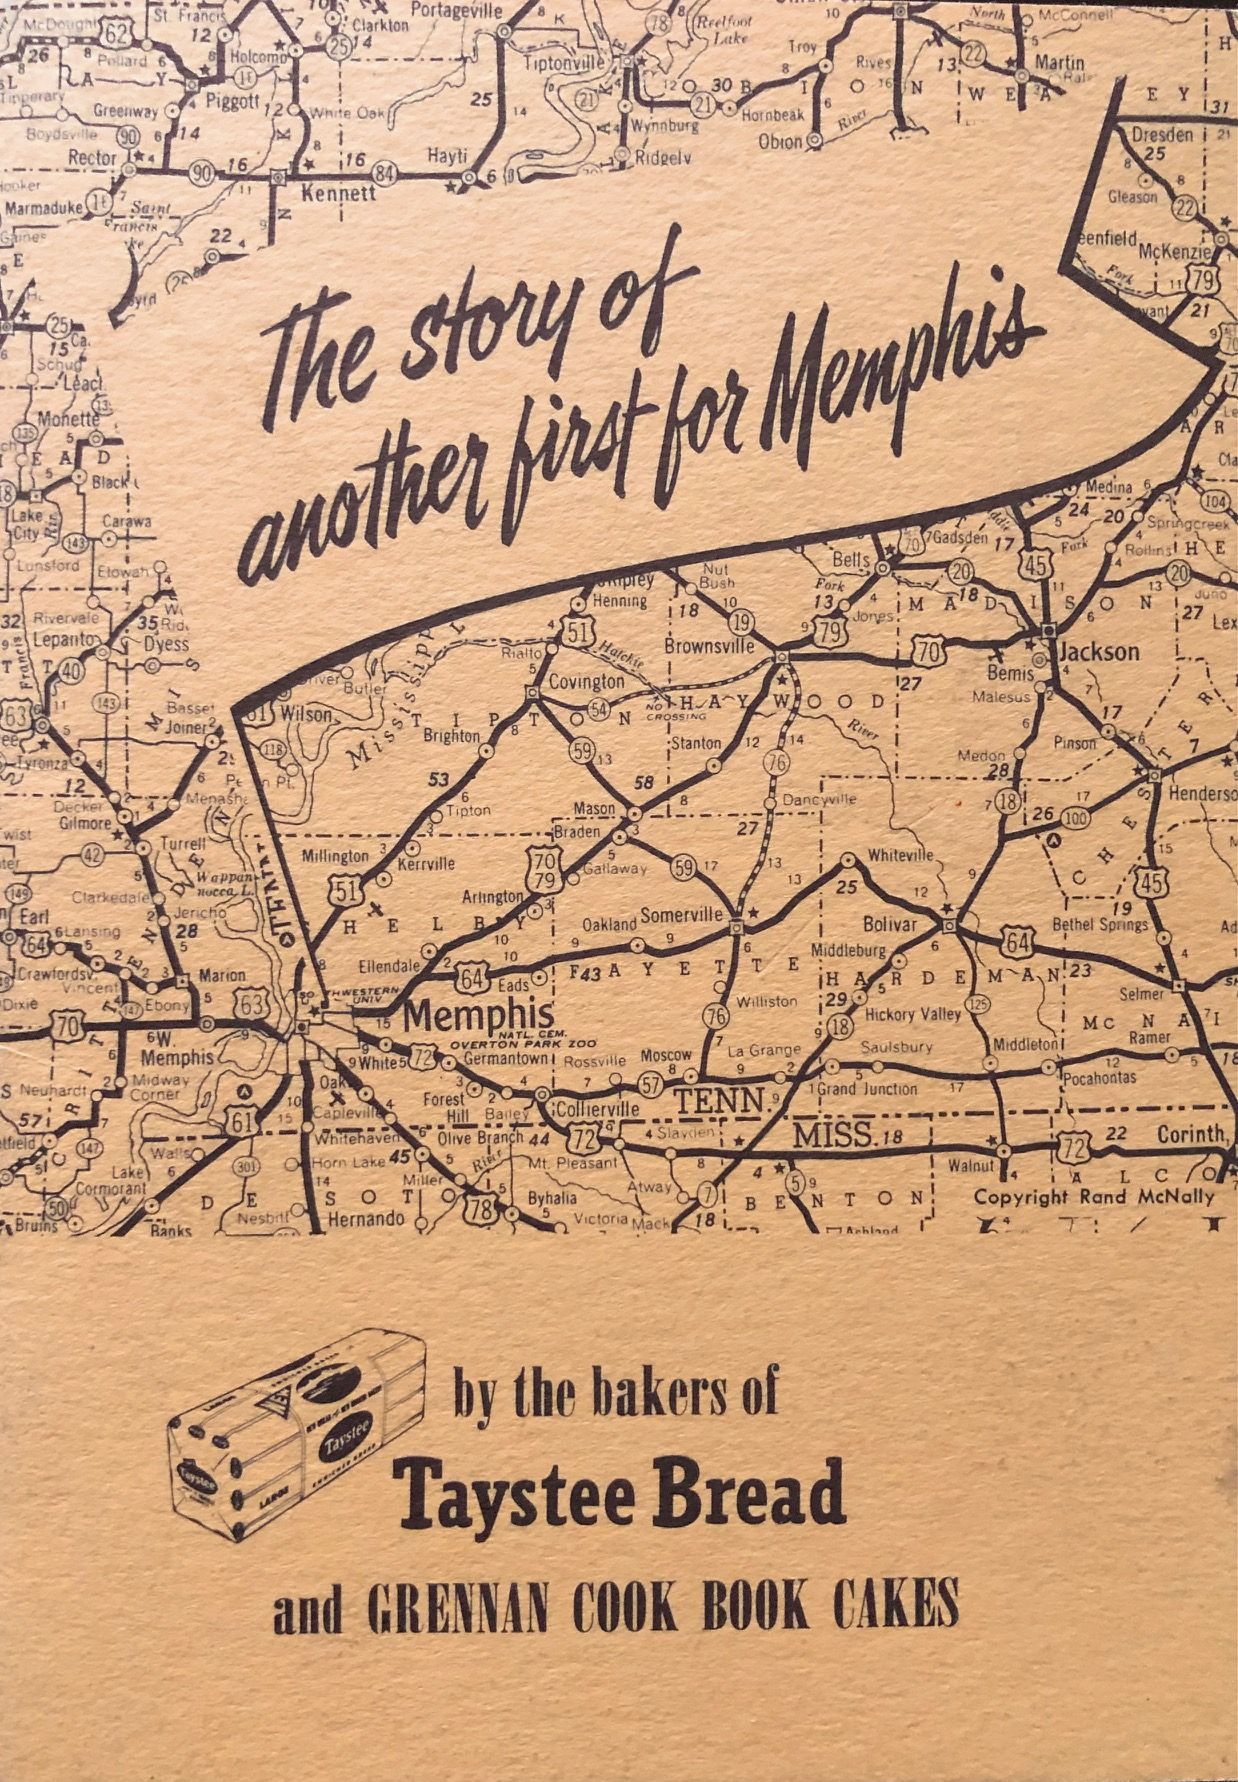 (*NEW ARRIVAL*) (Southern - Tennessee) Taystee Bread. The Story of Another First for Memphis